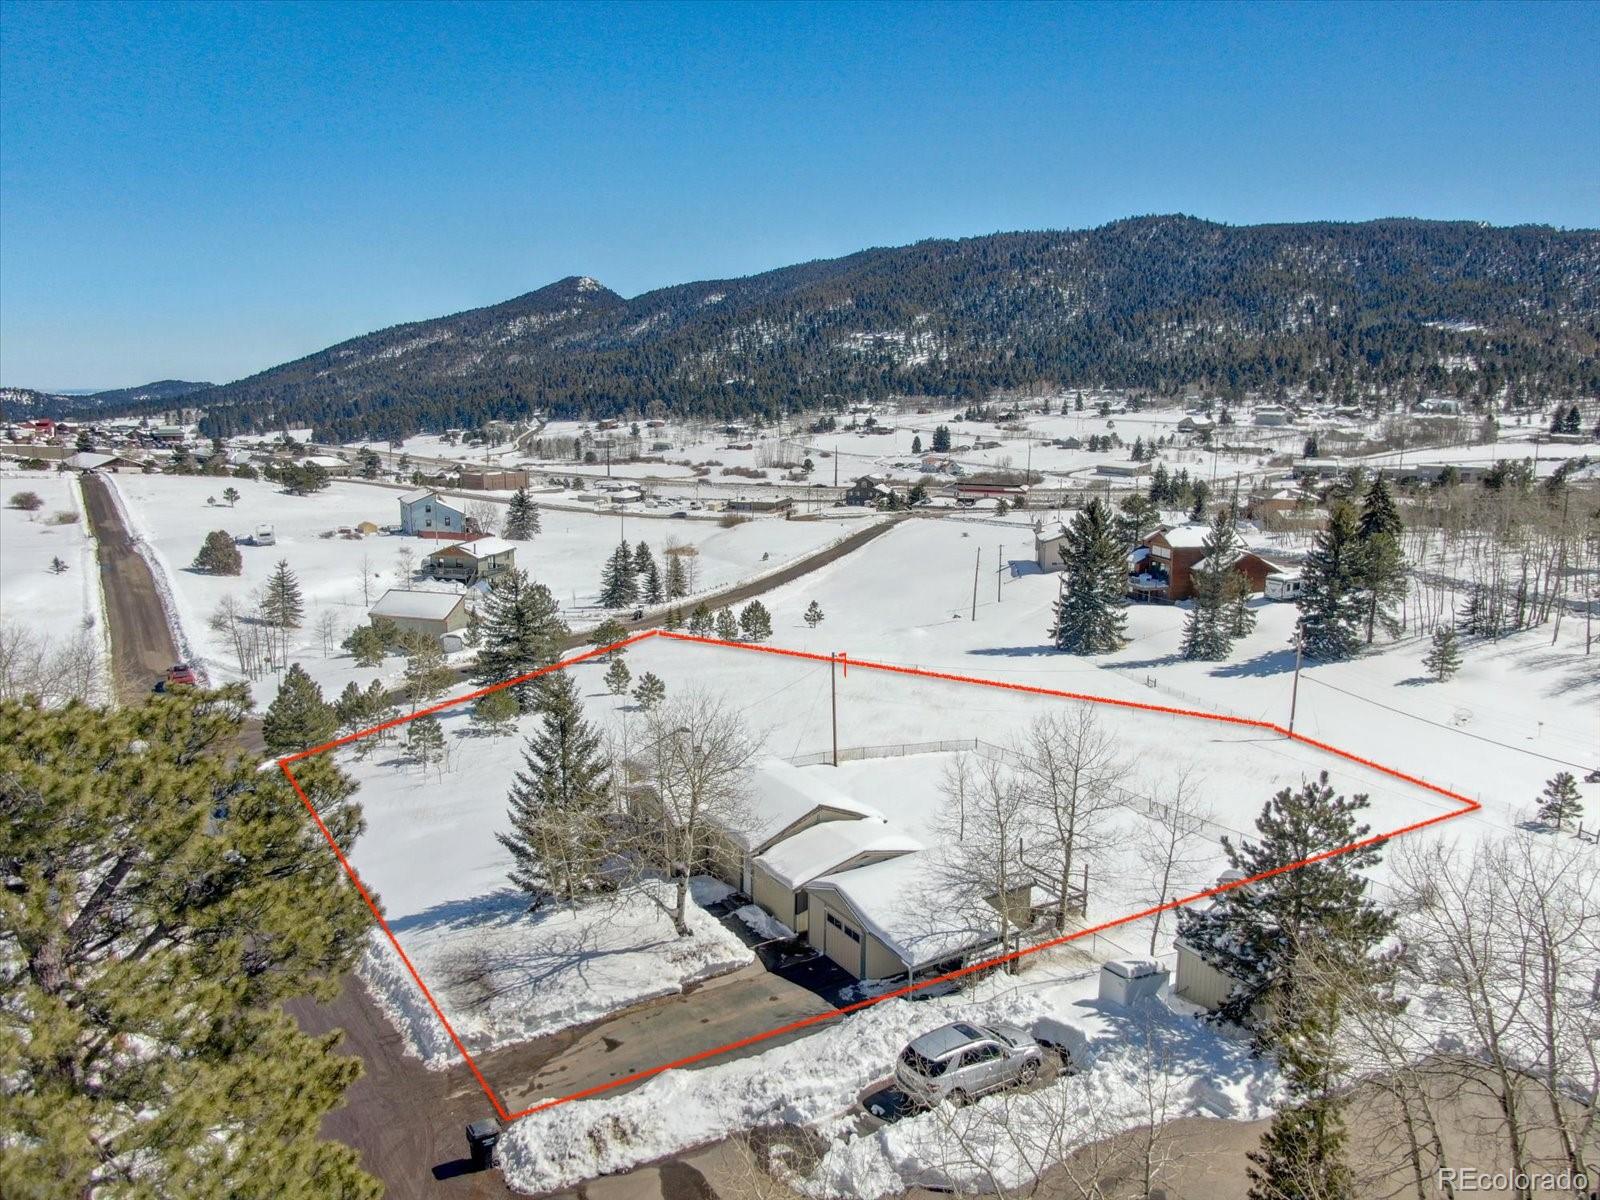 26274  cornelius street, Conifer sold home. Closed on 2024-04-24 for $400,000.